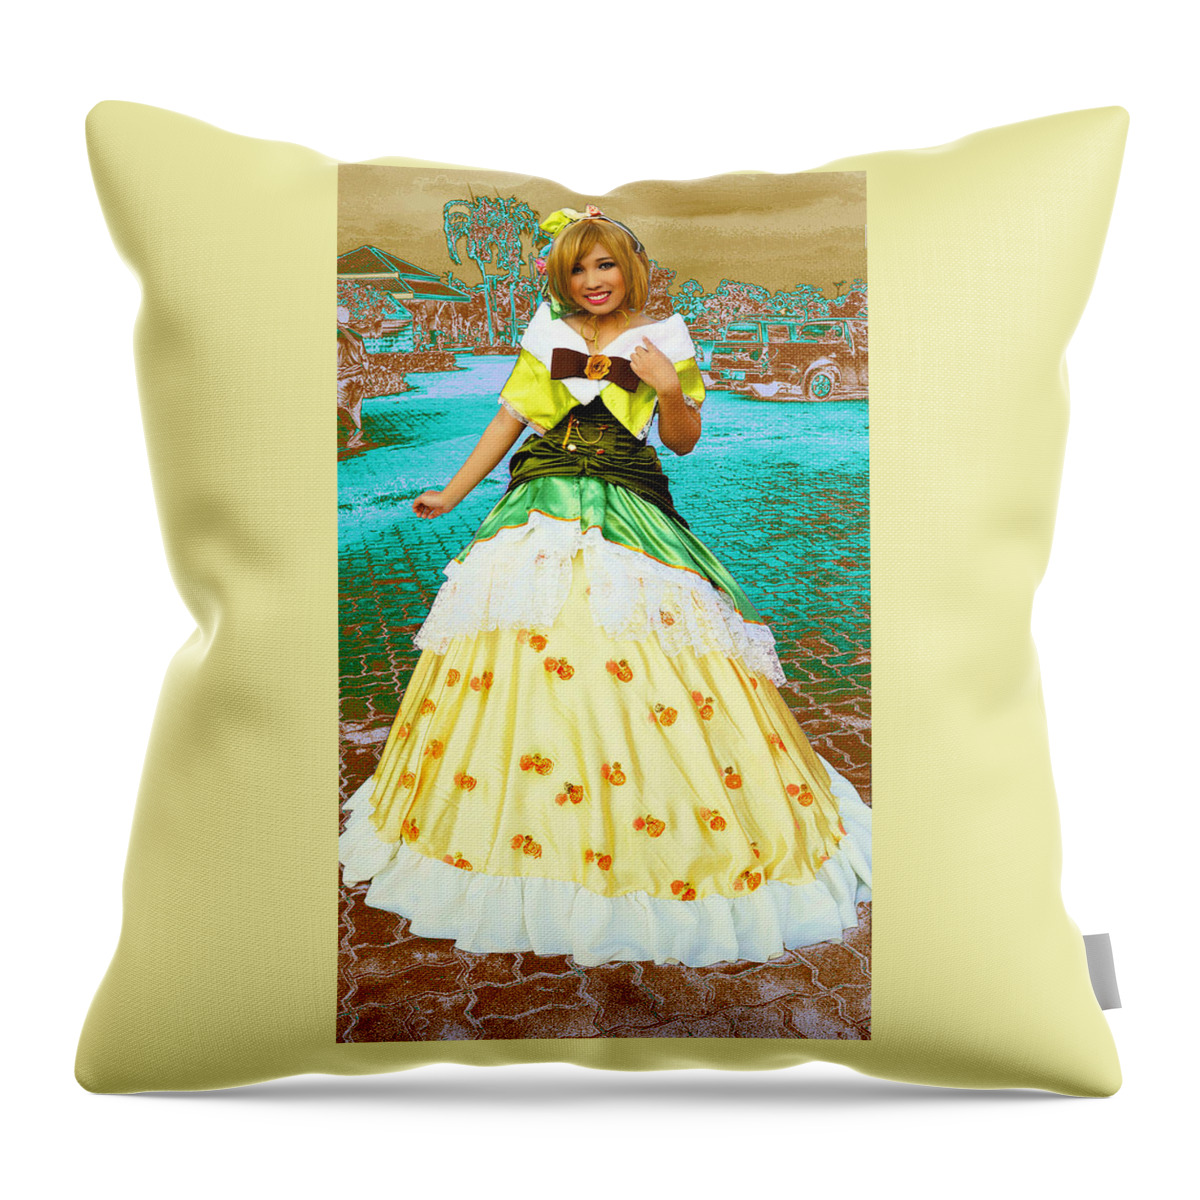 Cosplay Throw Pillow featuring the photograph My Wonderful Colored Dress by Ian Gledhill